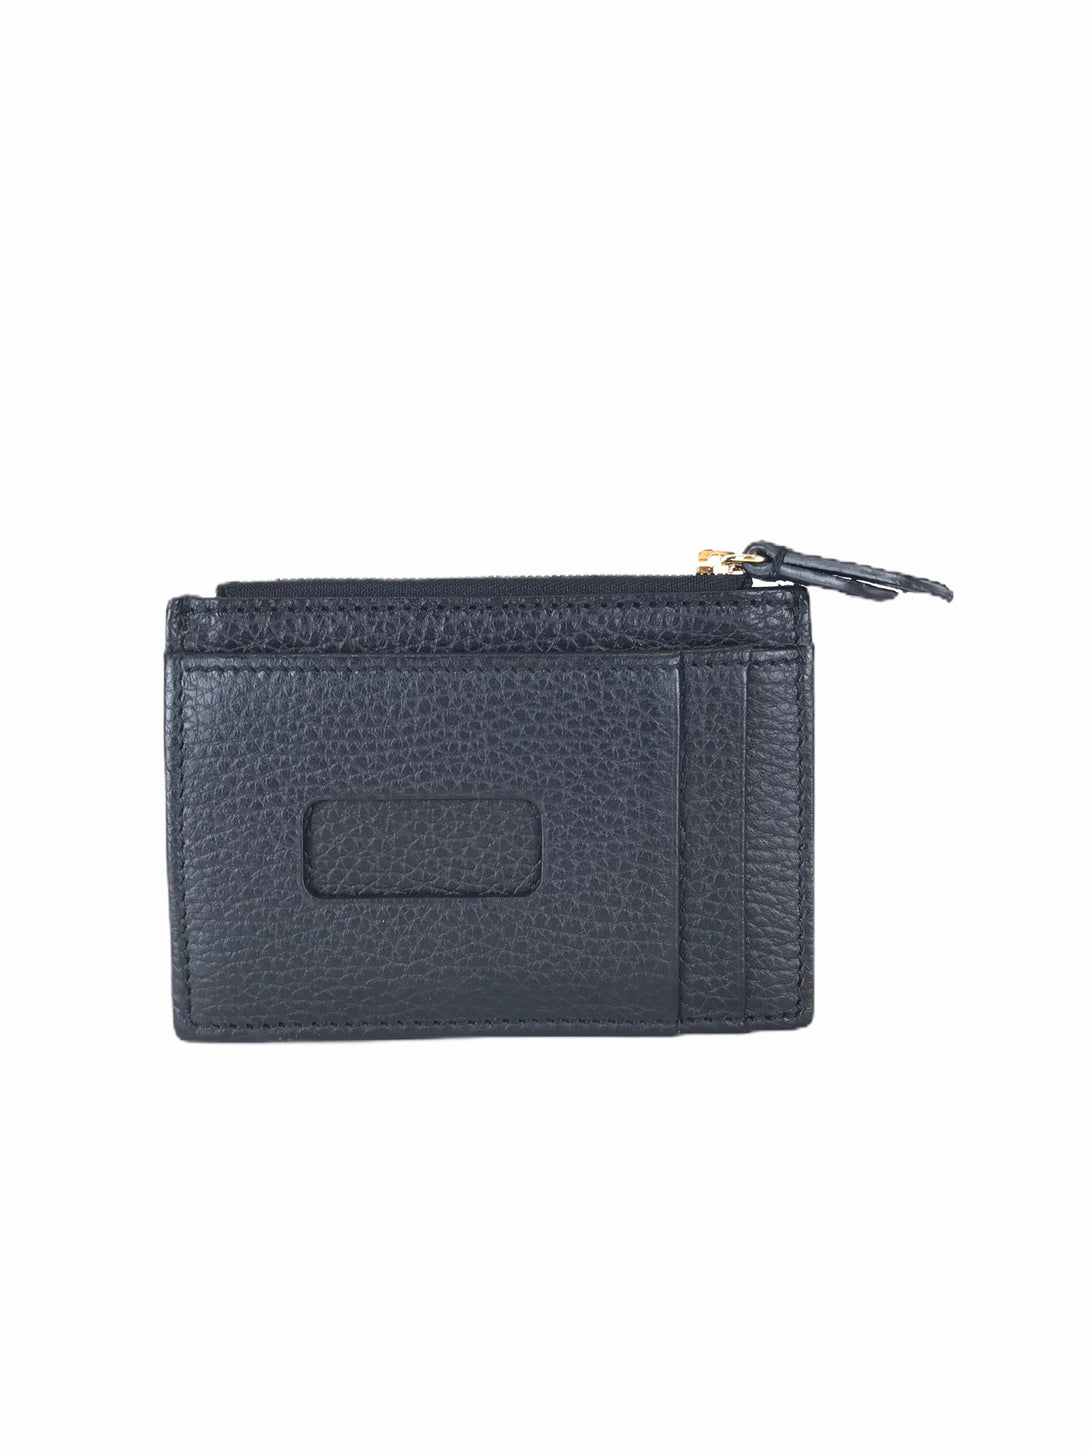 Gucci Black Leather Card Purse/Wallet - As Seen On Instagram 06/09/2020 - Siopaella Designer Exchange